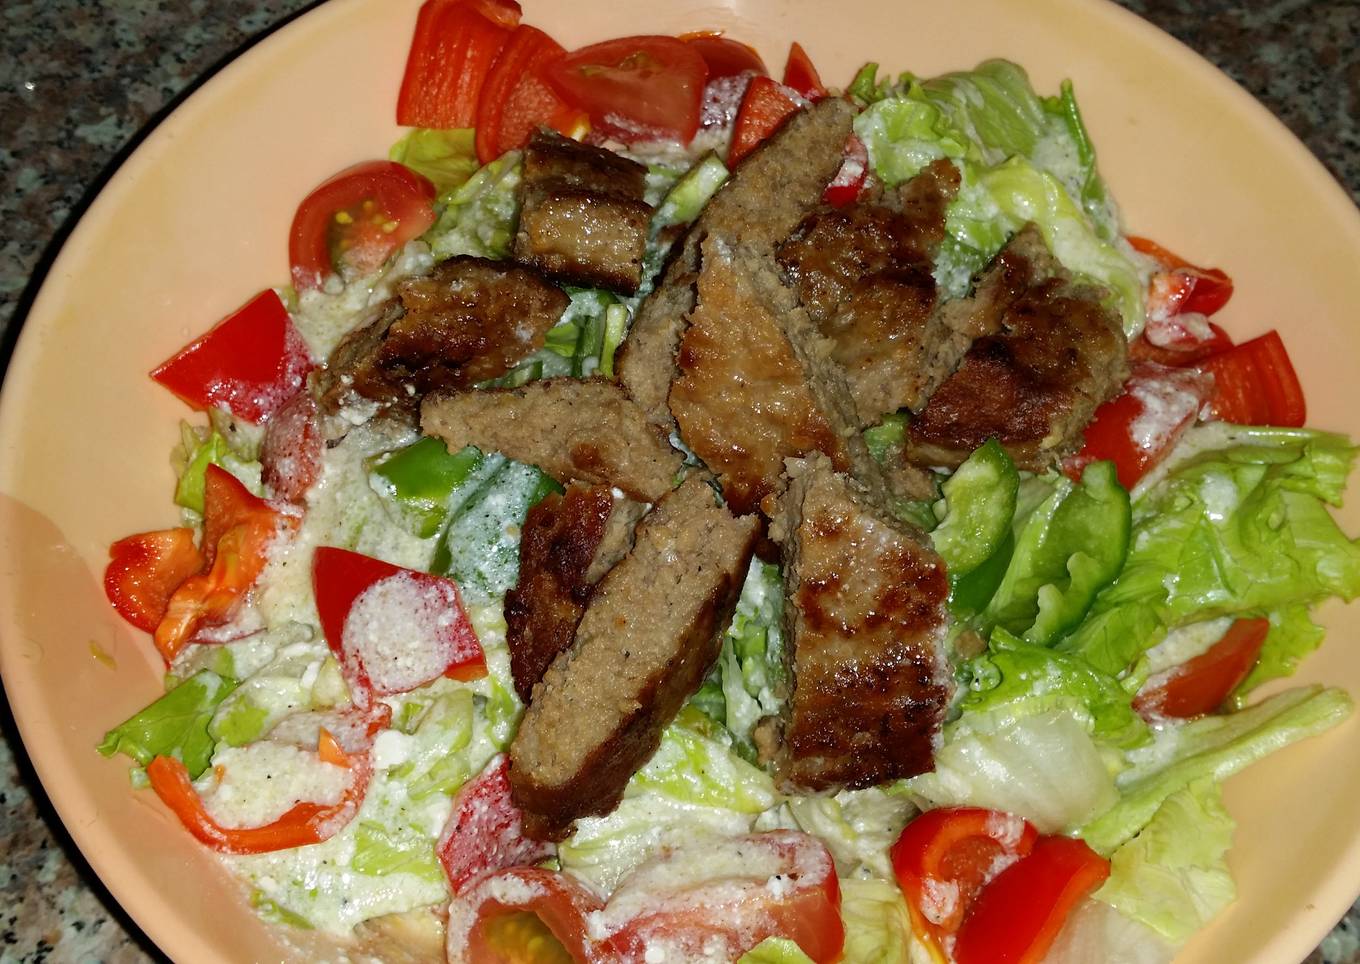 Caesar saled with beef and a twist